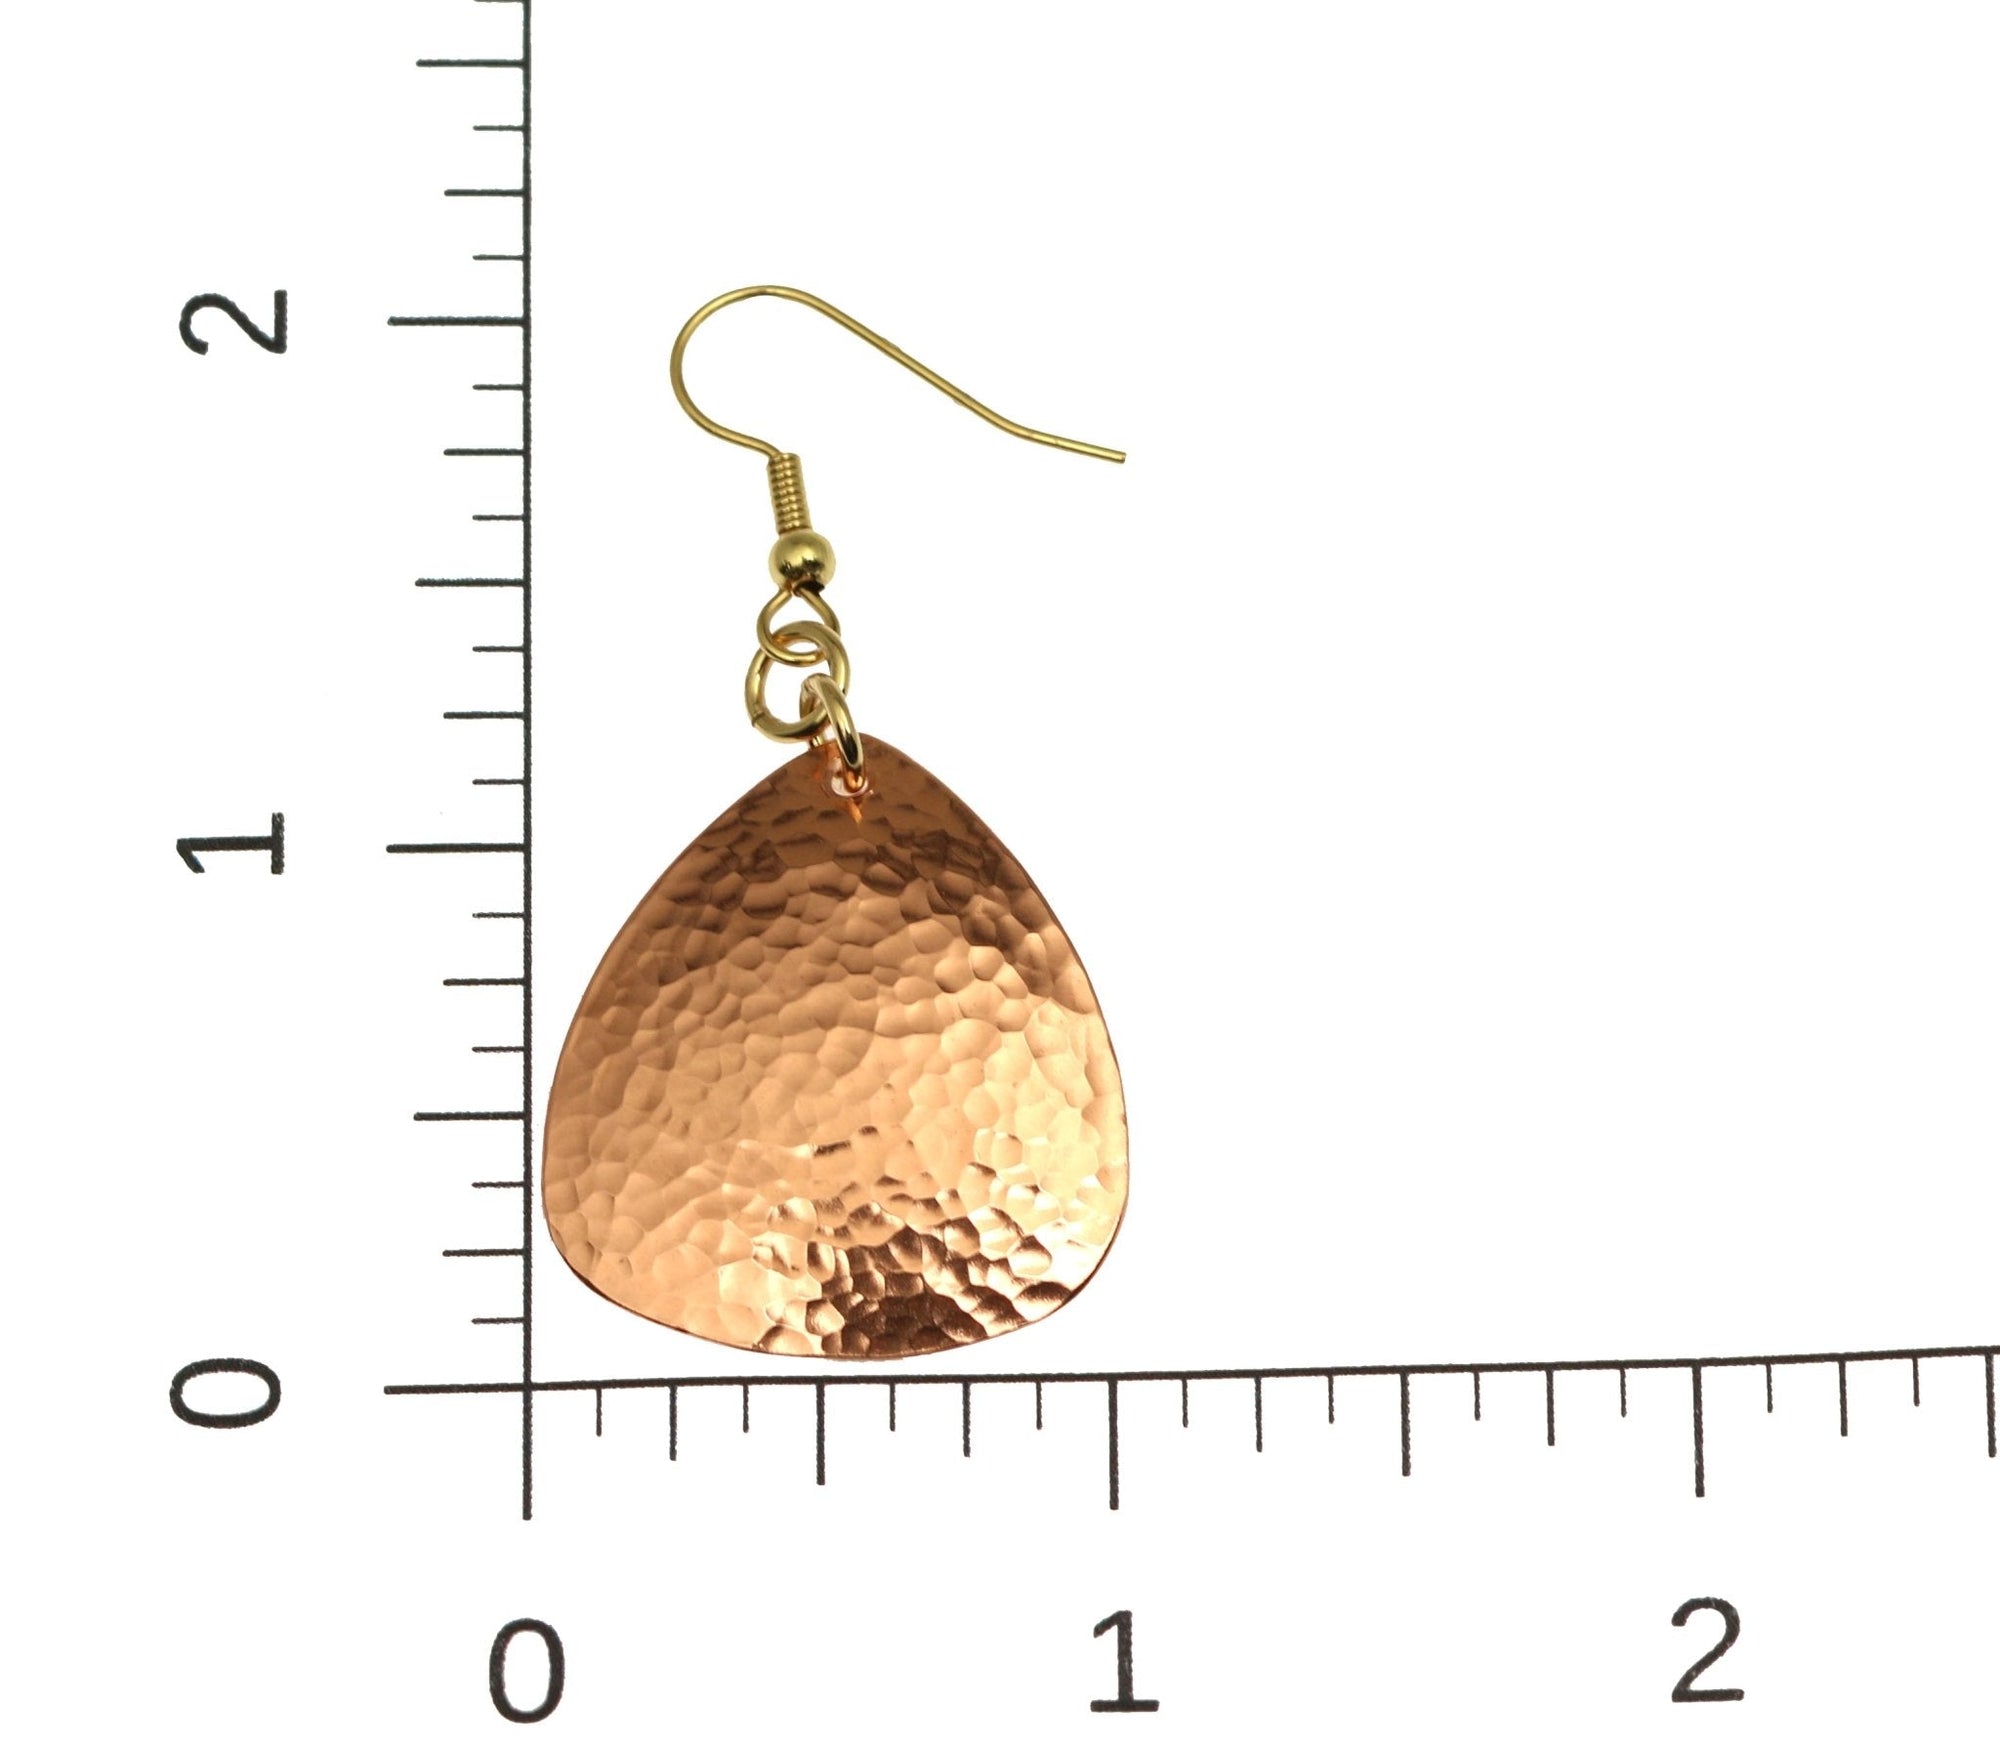 Hammered Copper Triangular Drop Earrings on Ruler for Scale